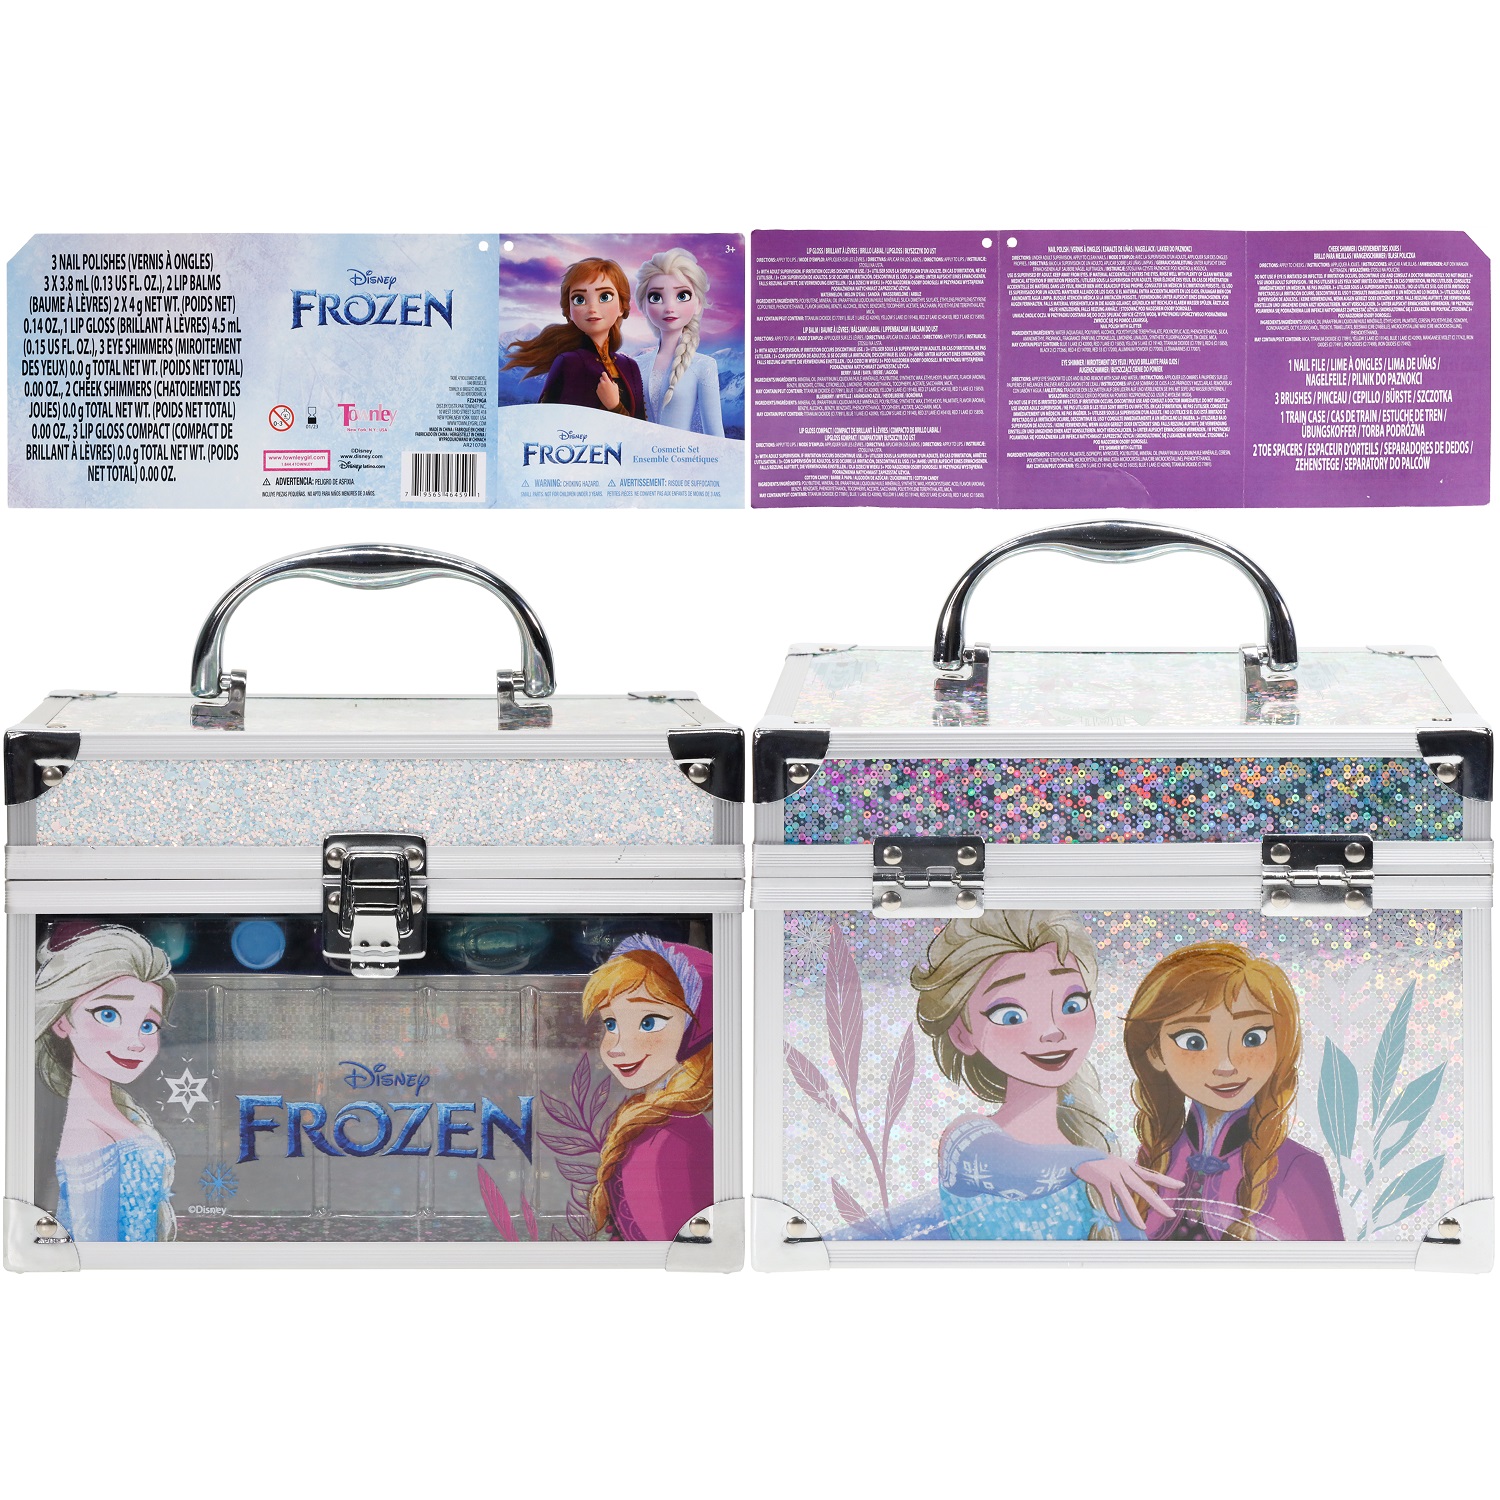 Disney Frozen Elsa and Anna Train Case Pretend Play Cosmetic Set- Kids Beauty, Toy, Gift for Girls, Ages 3+ by Townley Girl - image 3 of 13